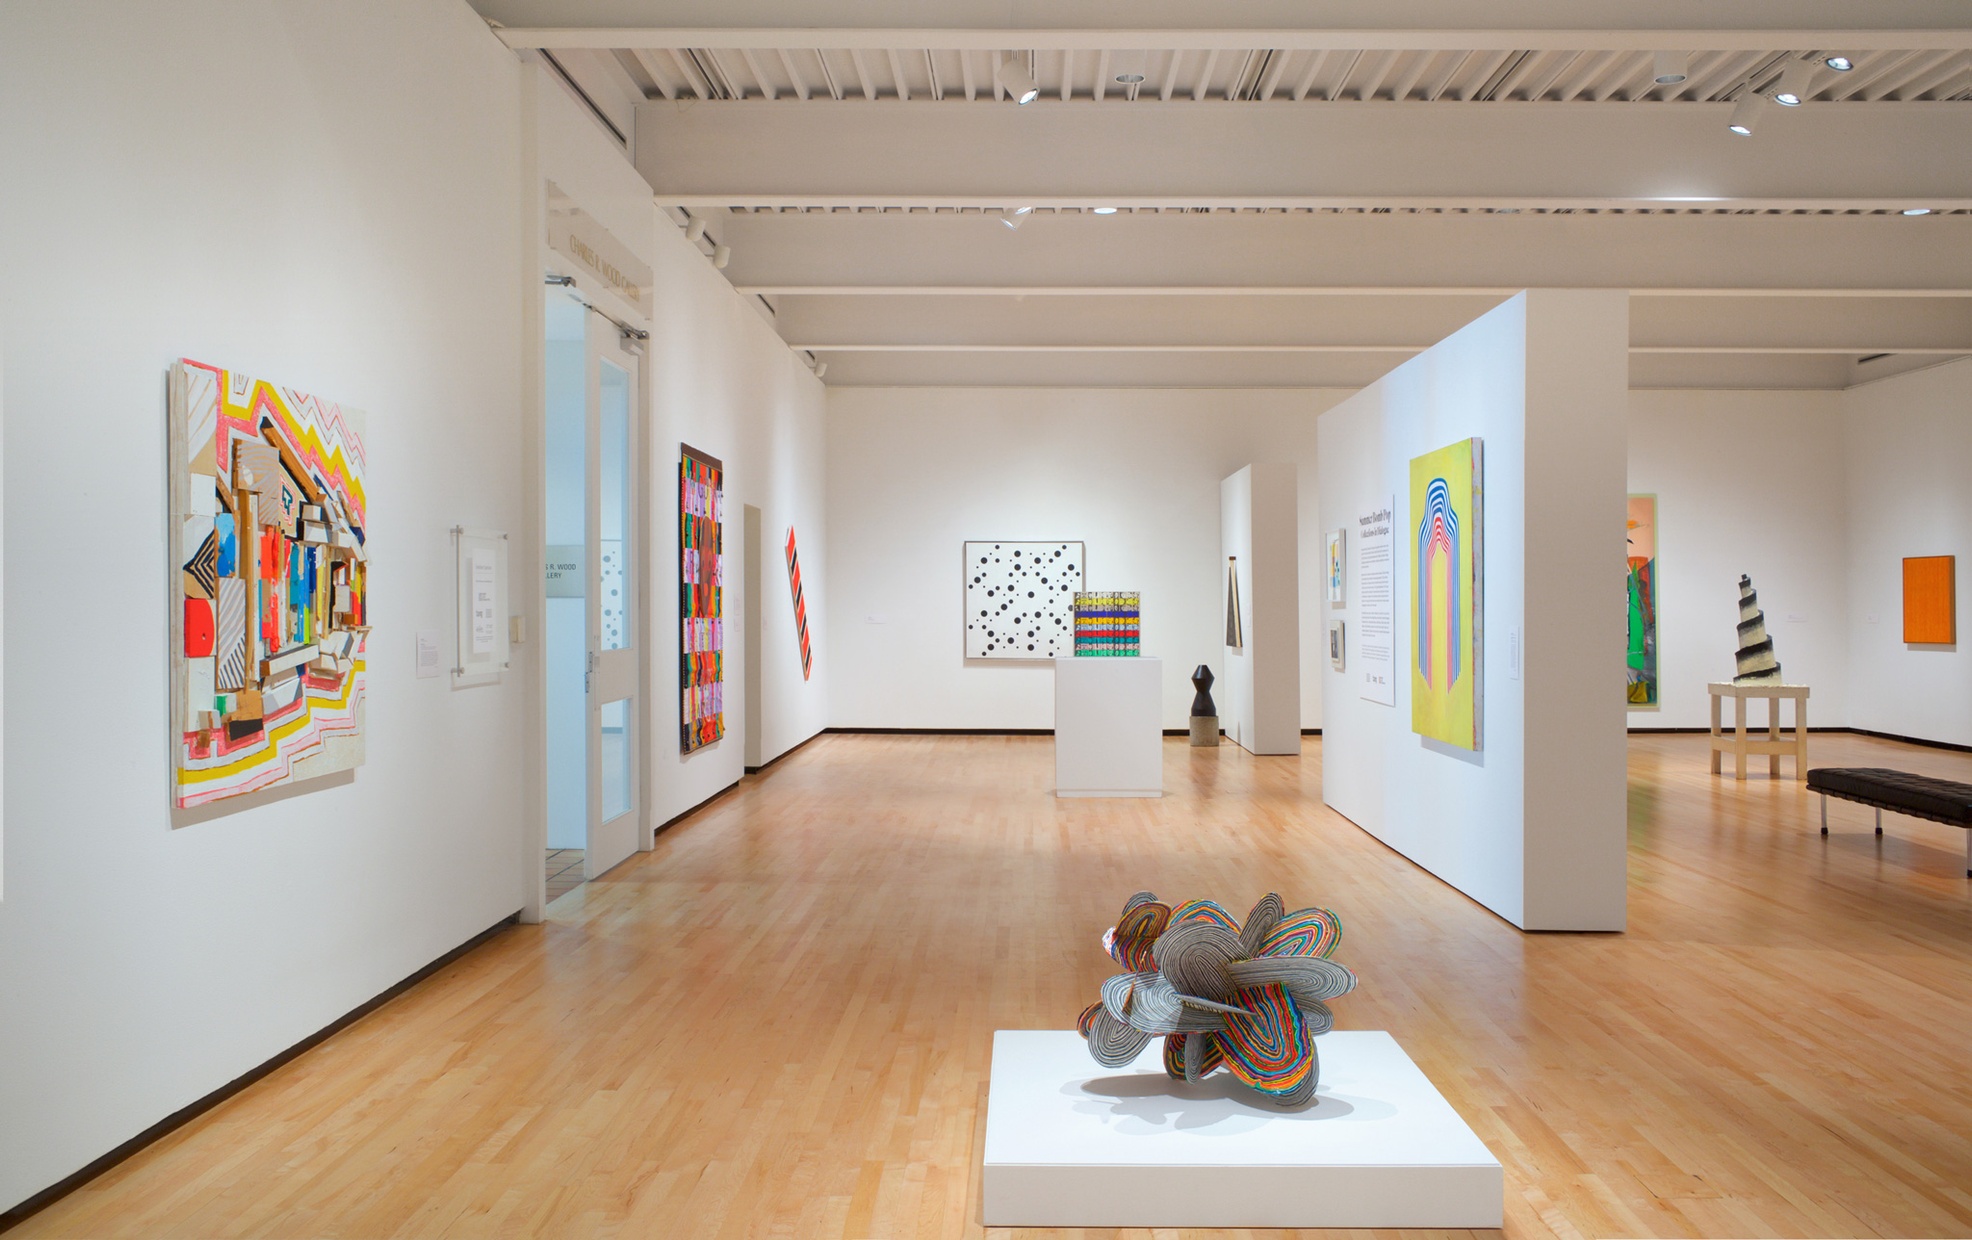 Bright, abstract artwork hangs in a gallery with white walls and wood floors with sculptures placed centrally throughout.